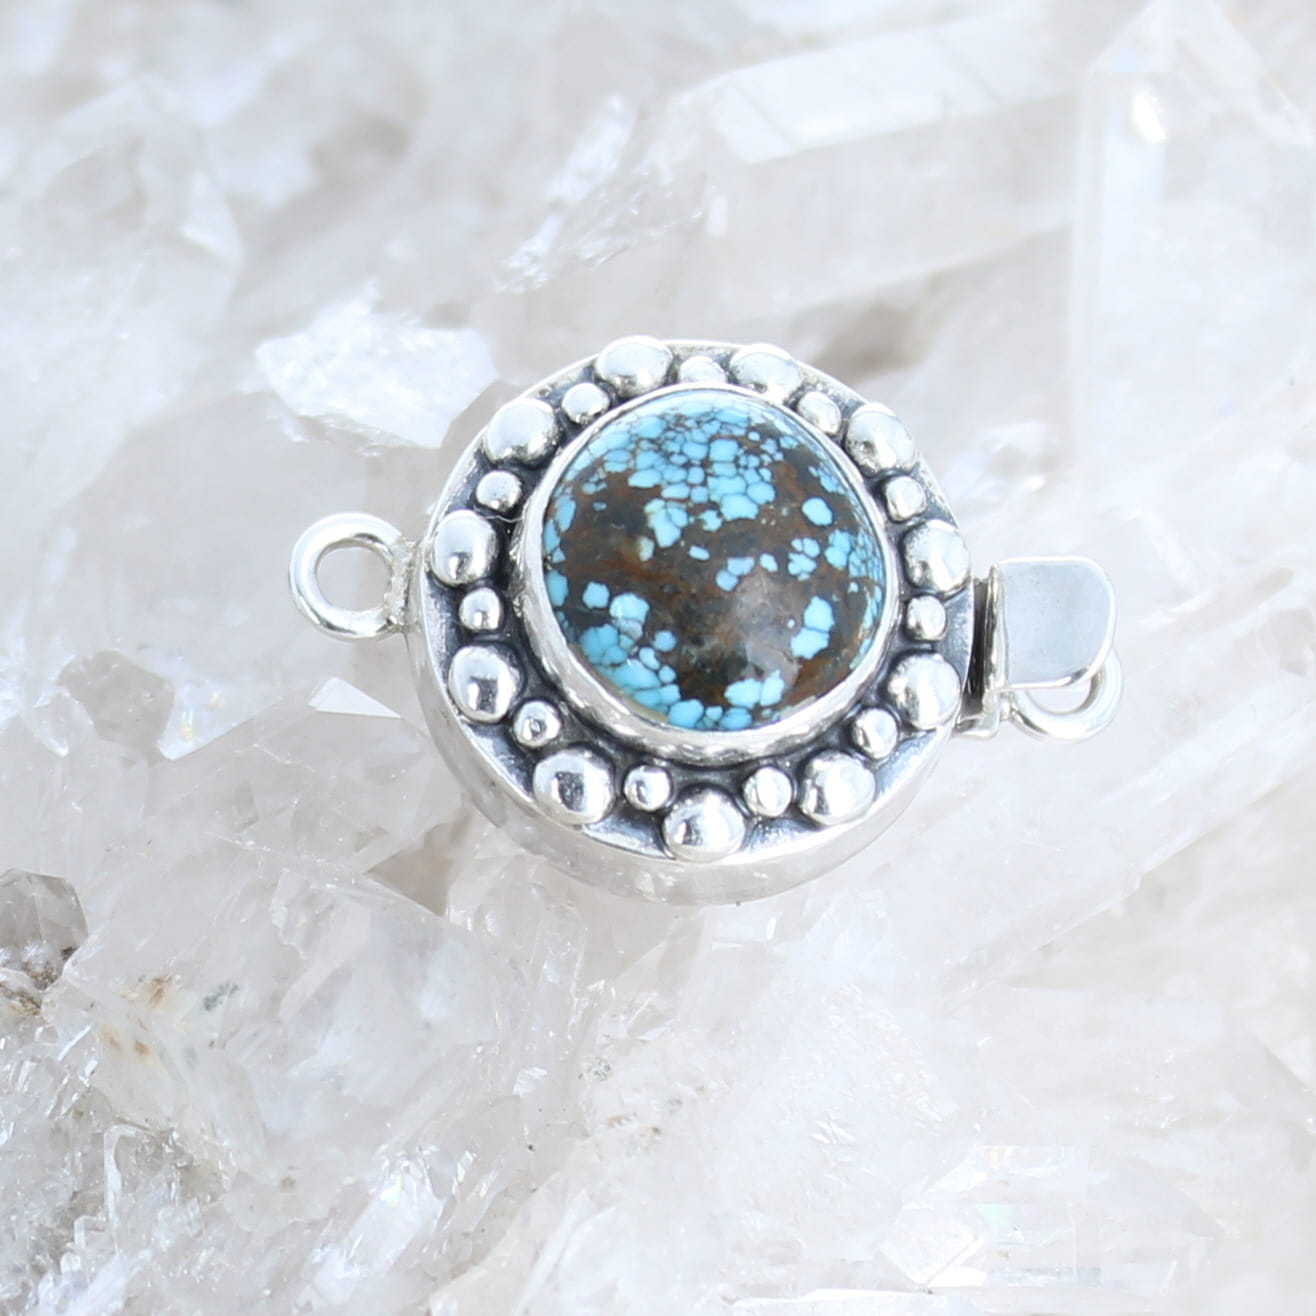 BLUE MOON TURQUOISE Clasp Blue Black Moon Design Sterling 13.5mm